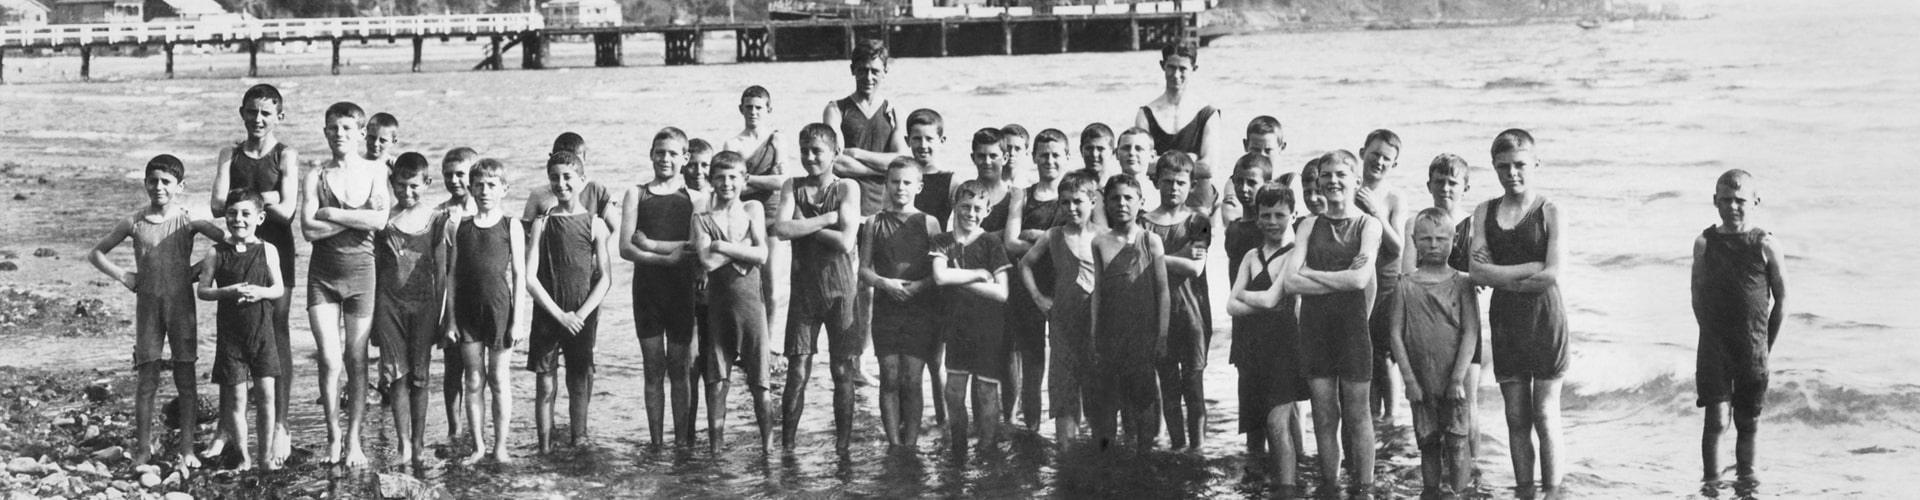 Boys Croydon Standing in bay with boat and wharf in background